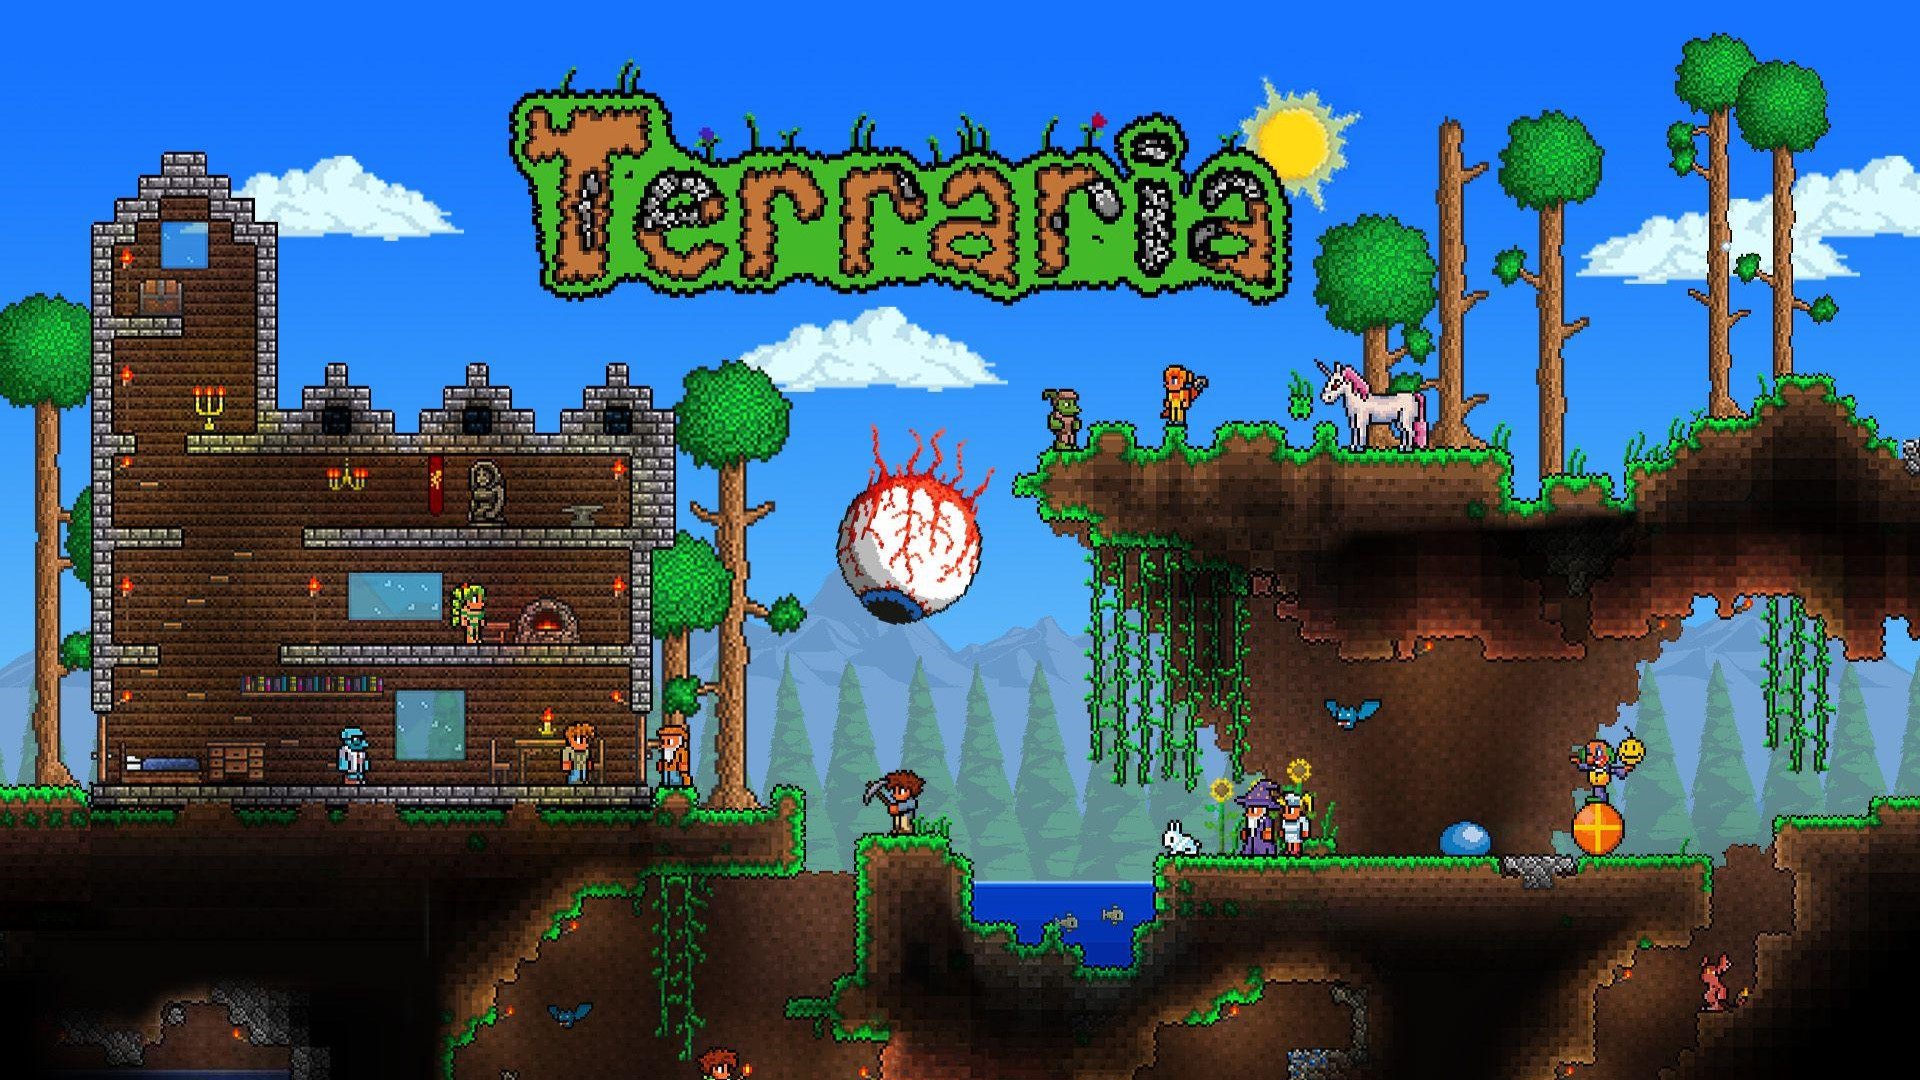 PC - Terraria will not fully download on Steam.